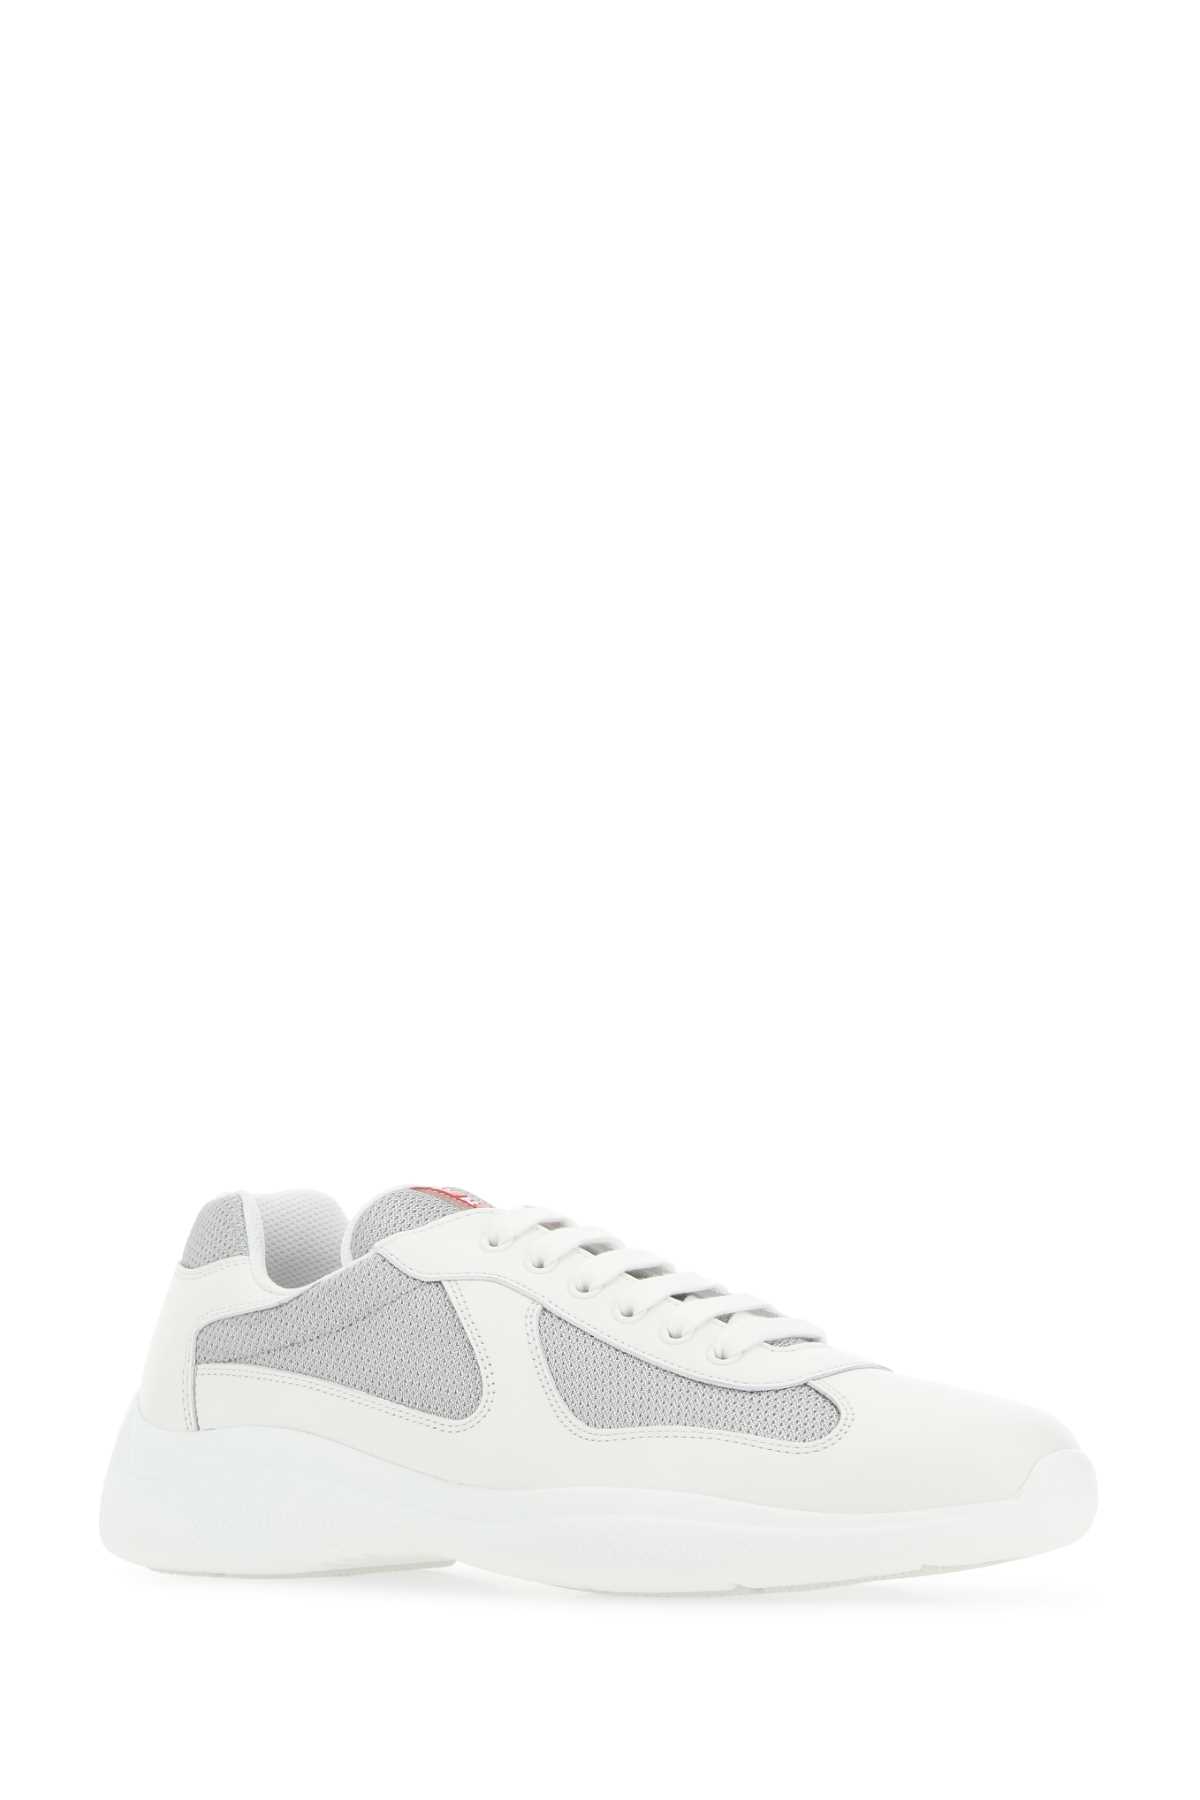 Prada Two-tone Leather And Fabric Sneakers In F0j36